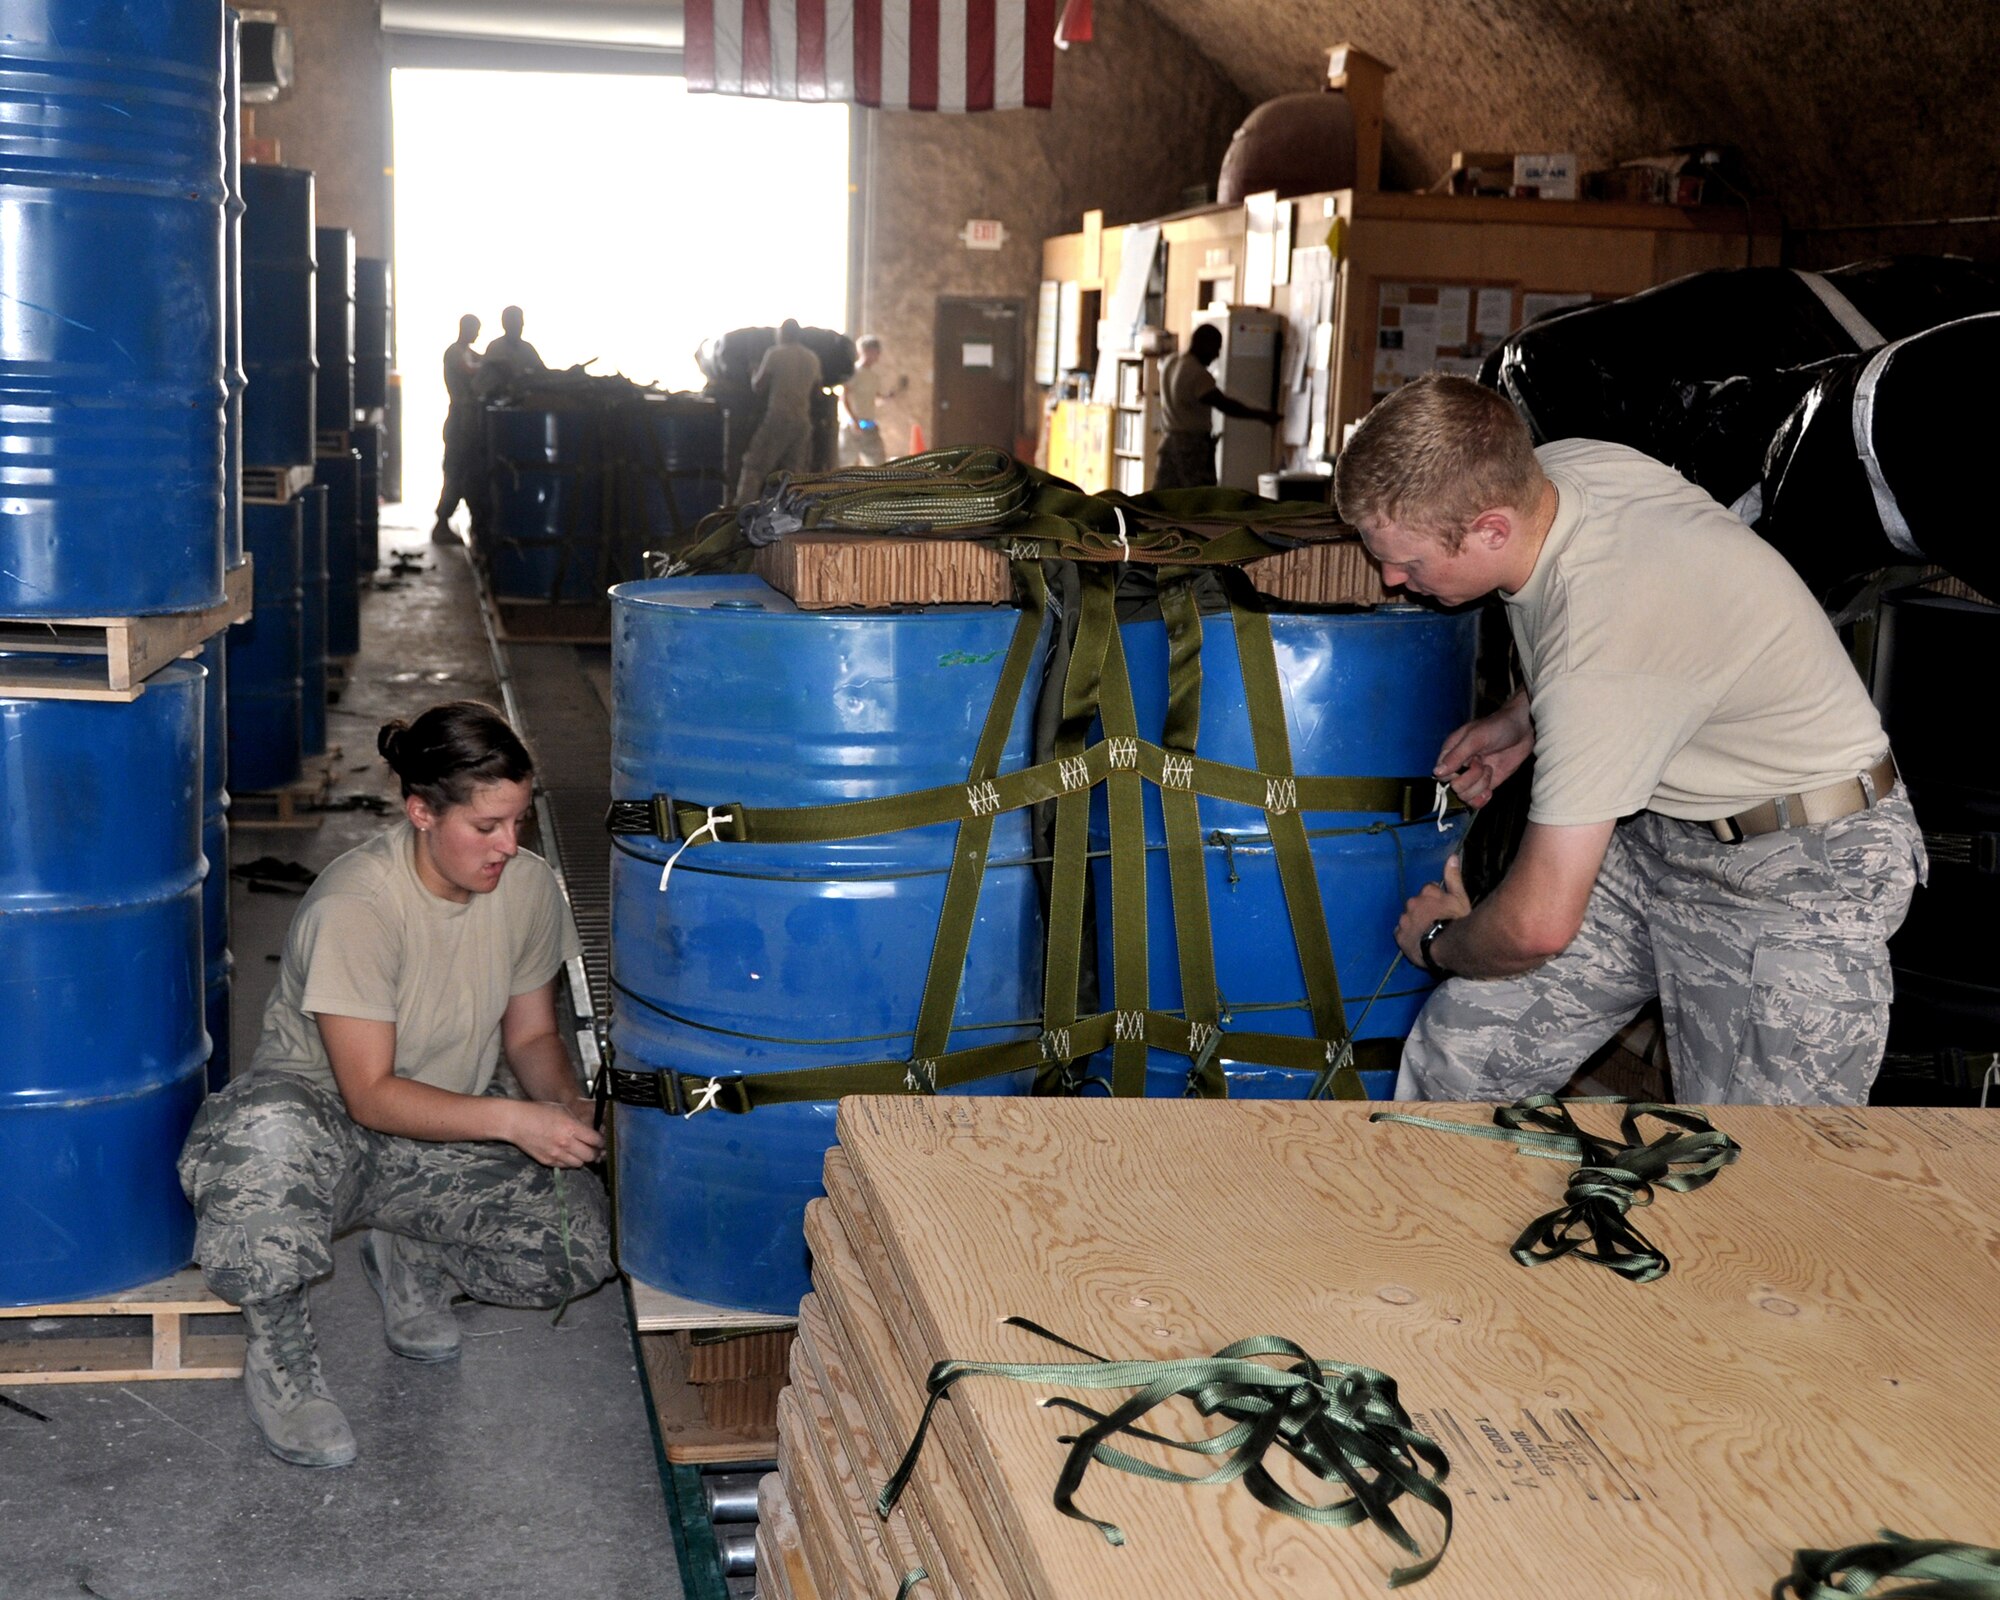 U.S. Air Force Academy Cadet 2nd Class Erin Doran and USAFA Cadet 1st Class Jordan Wittman work together to expedite the bundling process with U.S. Army Riggers June 18, 2011, in Southwest Asia. Cadets Doran and Wittman are taking part in "Deployed Ops", a summer program that sends Academy cadets to deployed locations to follow officers in different career fields and to gain an understanding of career responsibilities. (U.S. Air Force photo/Cadet 1st Class Shaina Thompson)
